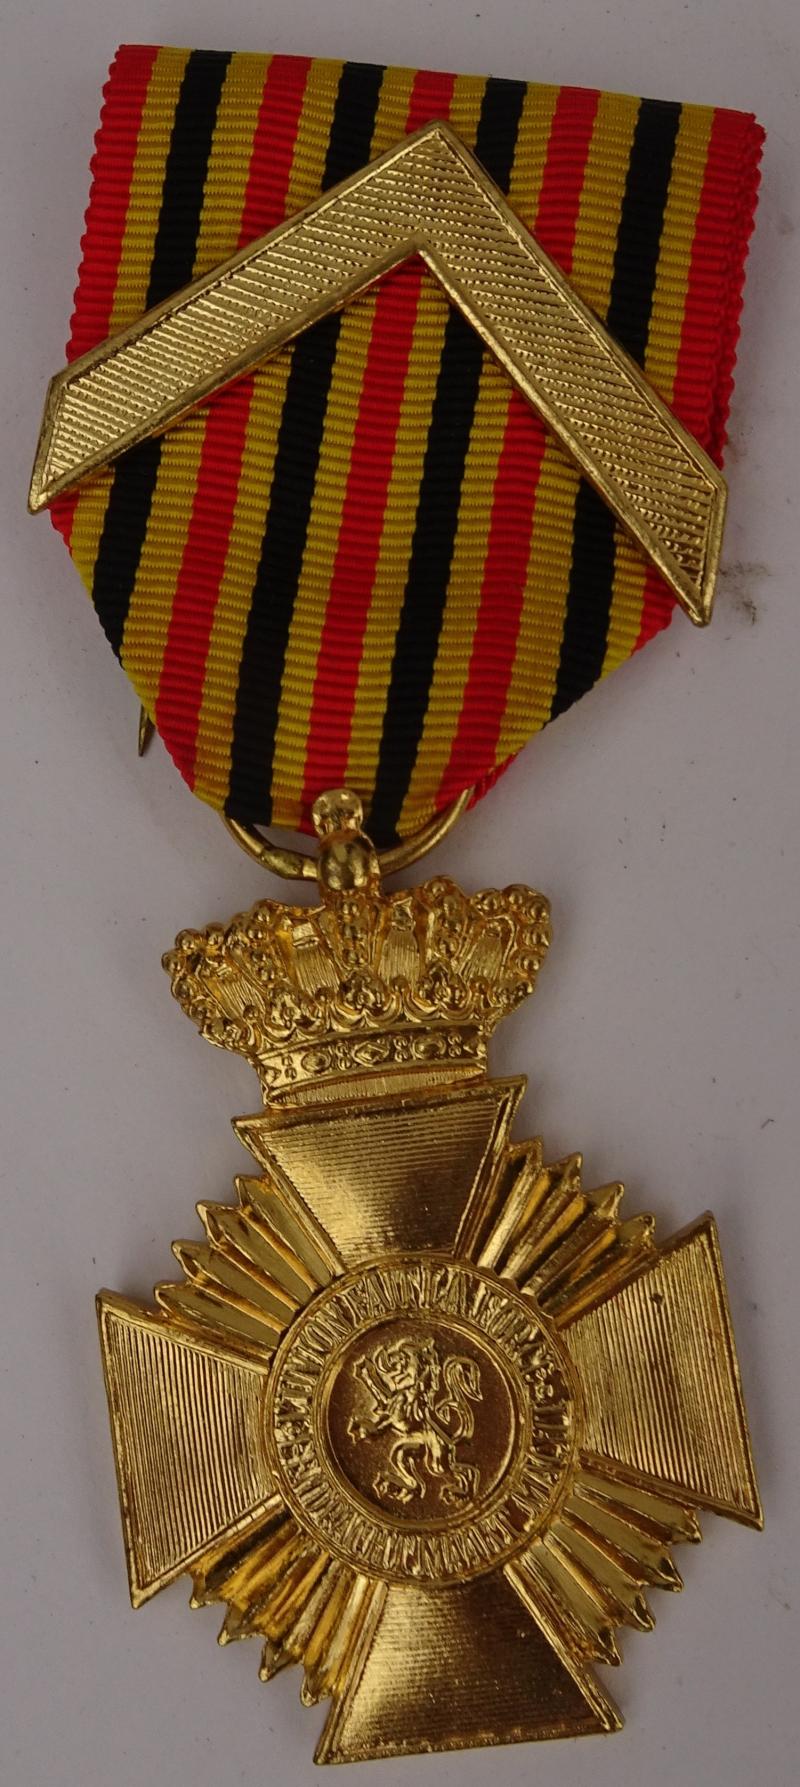 A Military Medal First Class